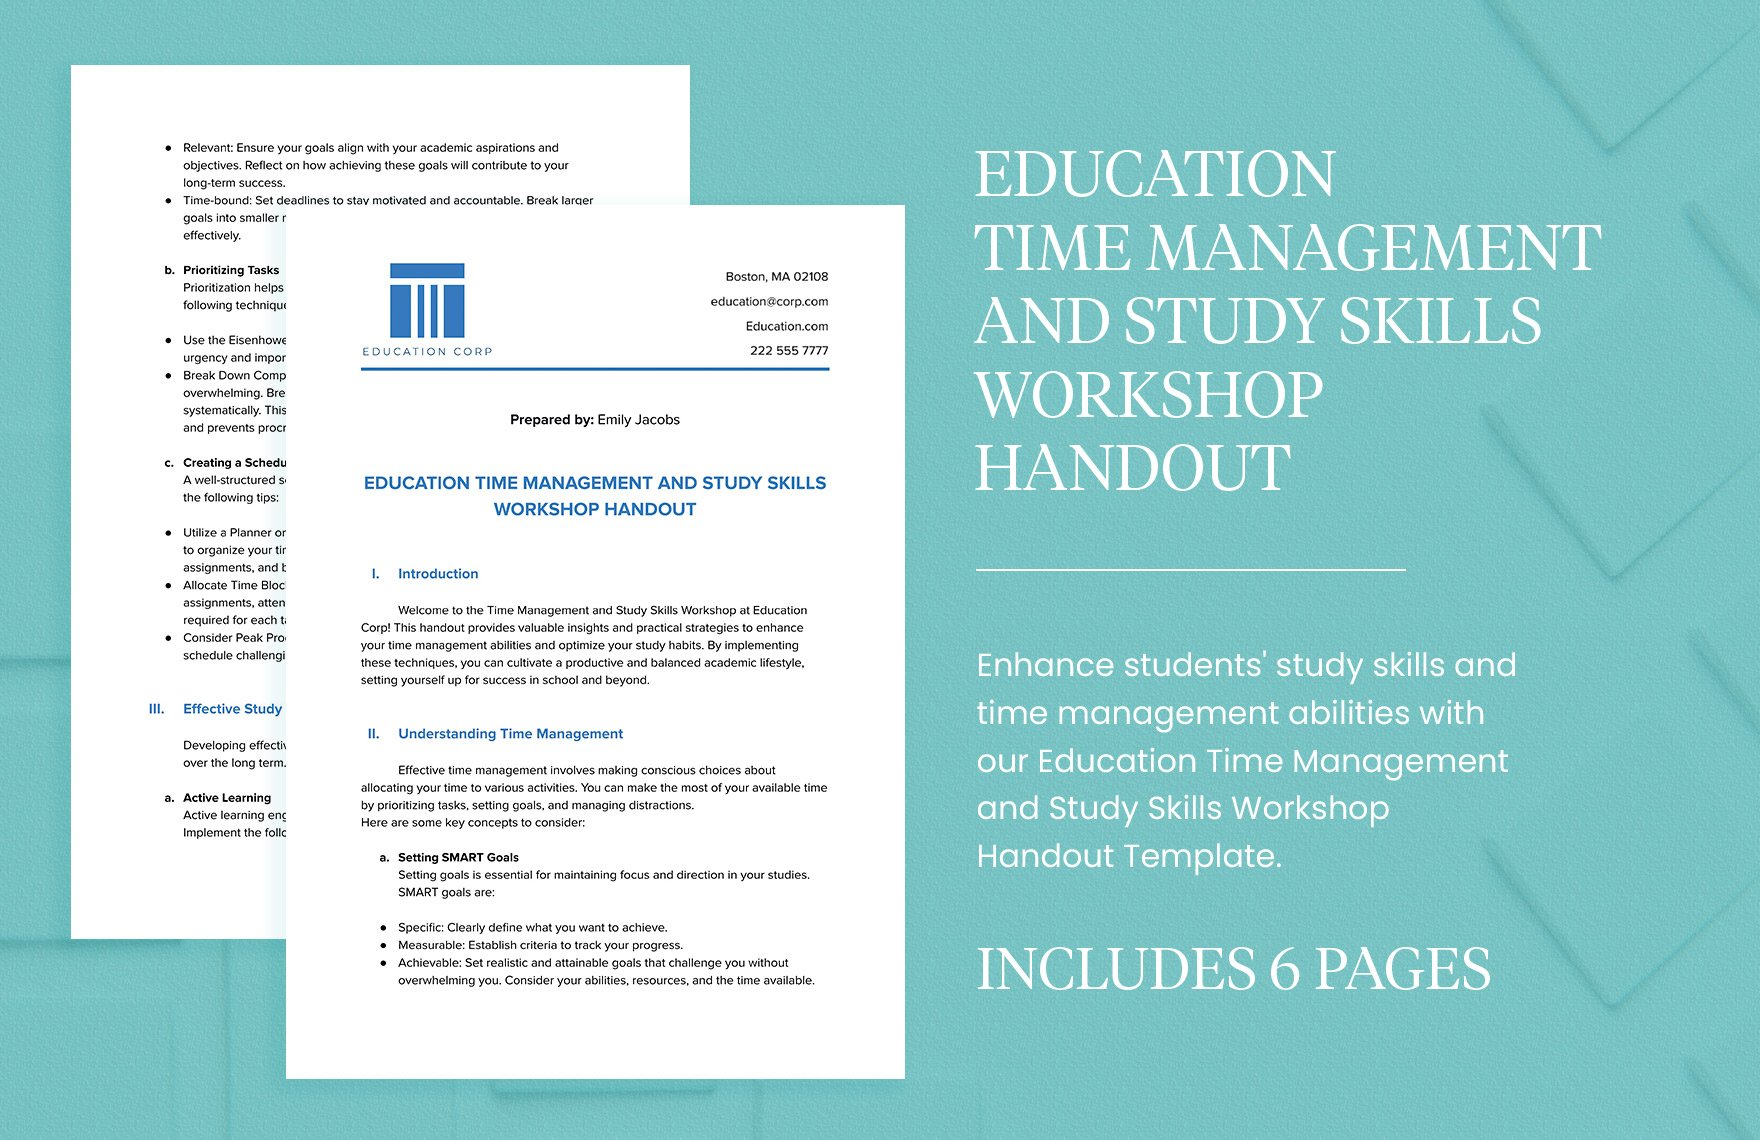 Education Time Management and Study Skills Workshop Handout